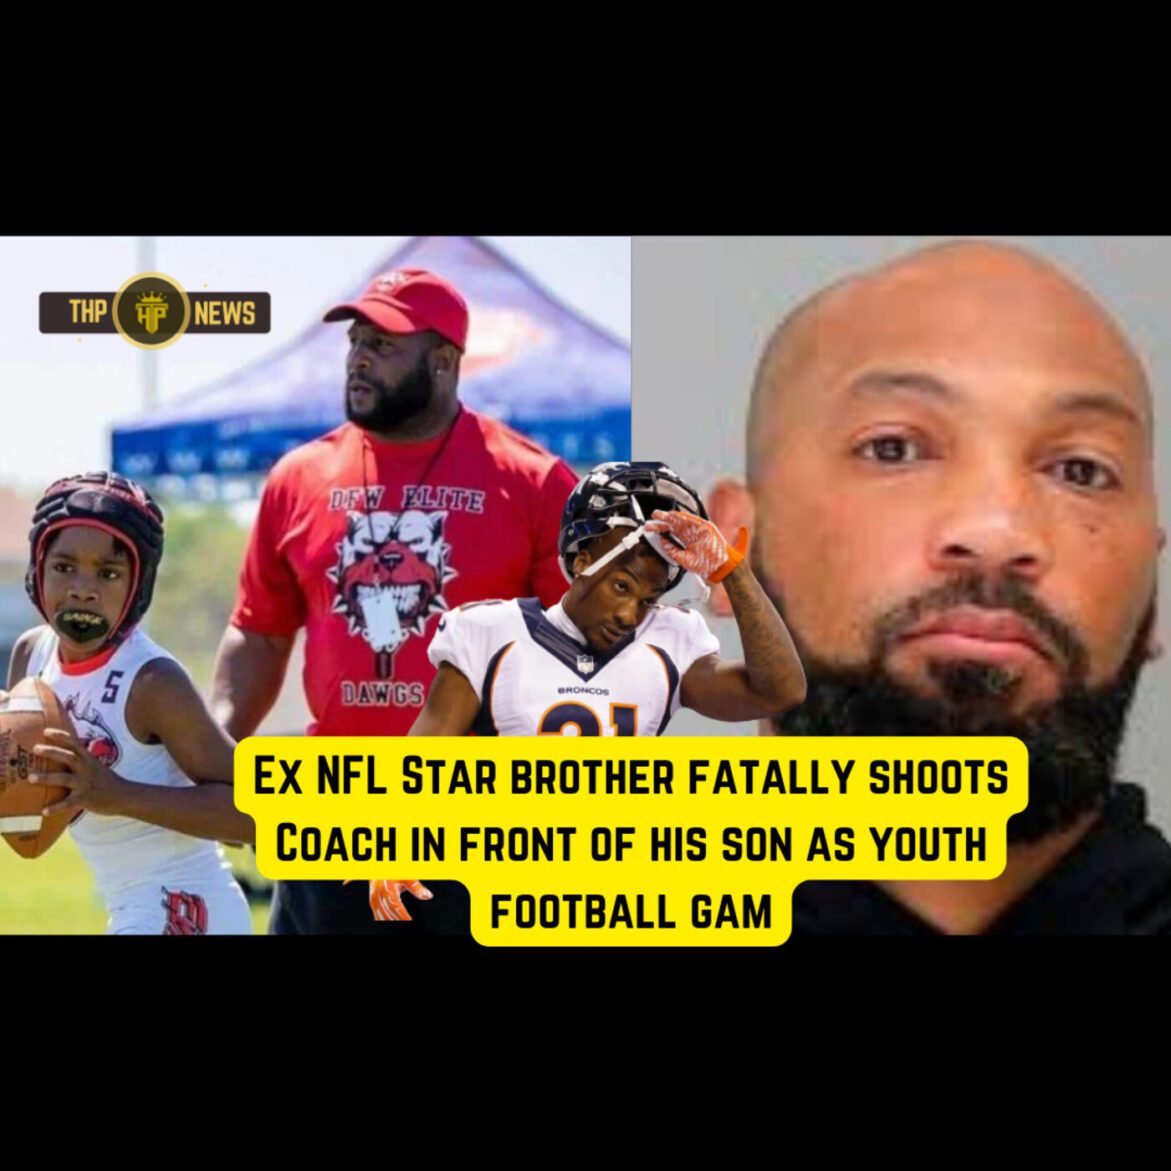 Black Podcasting - Youth Football Coach shot at game in Dallas over officiating calls disagreement - Fatal ending details